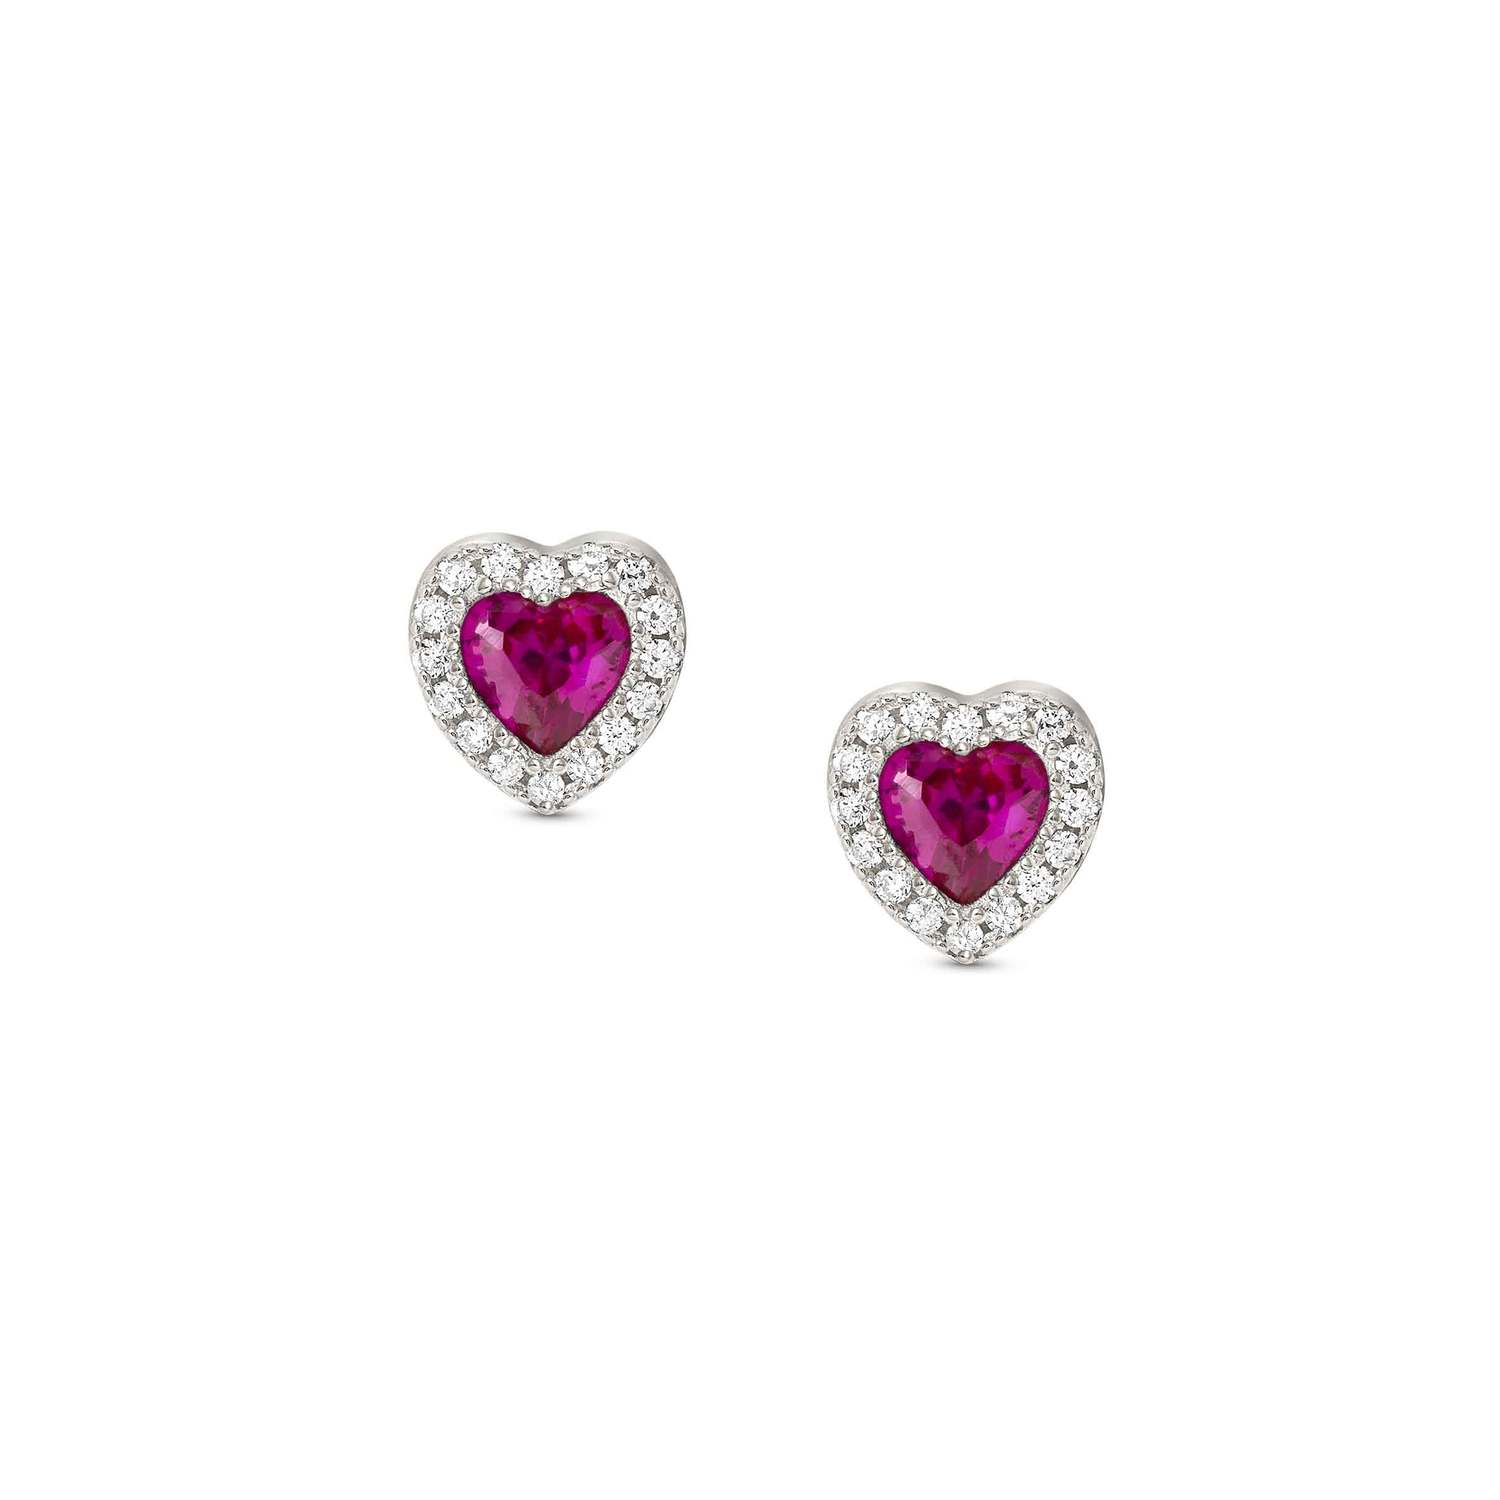 Nomination All My Love Silver Heart Stud Earrings - Deep Pink